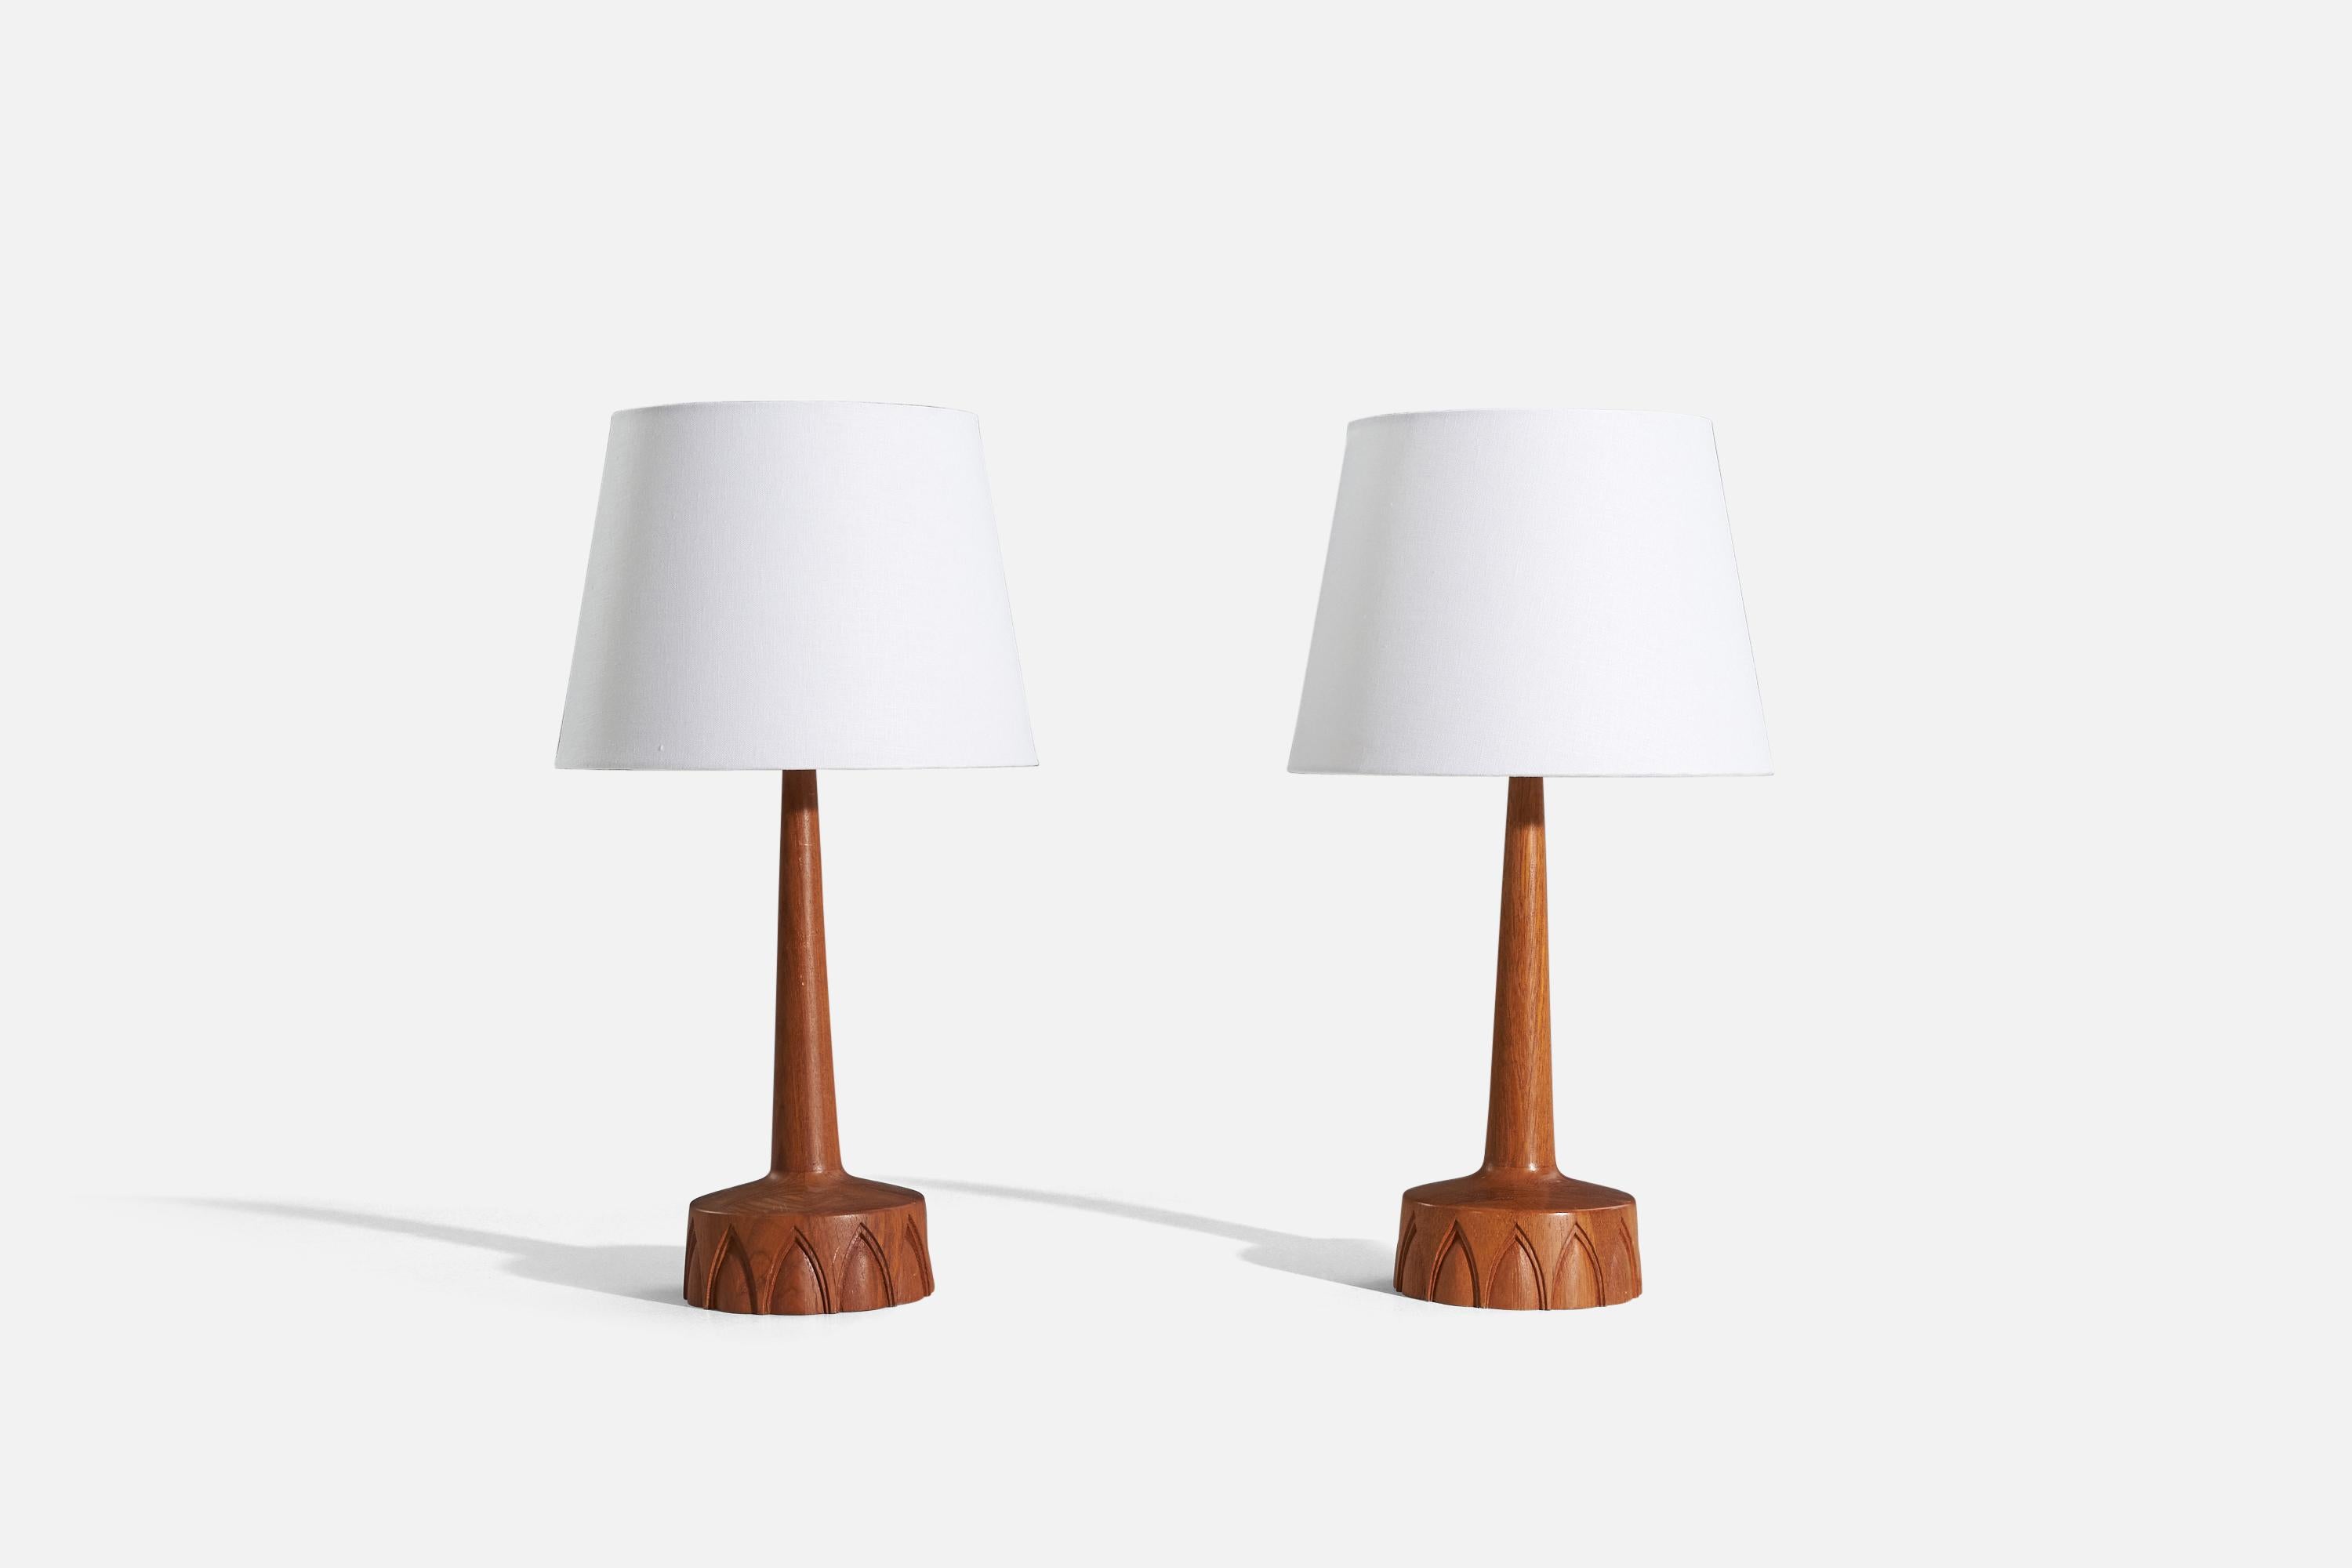 A pair of teak table lamps, designed and produced by a Swedish designer, Sweden, c. 1960s.

Sold without lampshade. 
Dimensions of Lamp (inches) : 17 x 6.25 x 6.25 (H x W x D)
Dimensions of Shade (inches) : 9 x 12 x 9 (T x B x H)
Dimension of